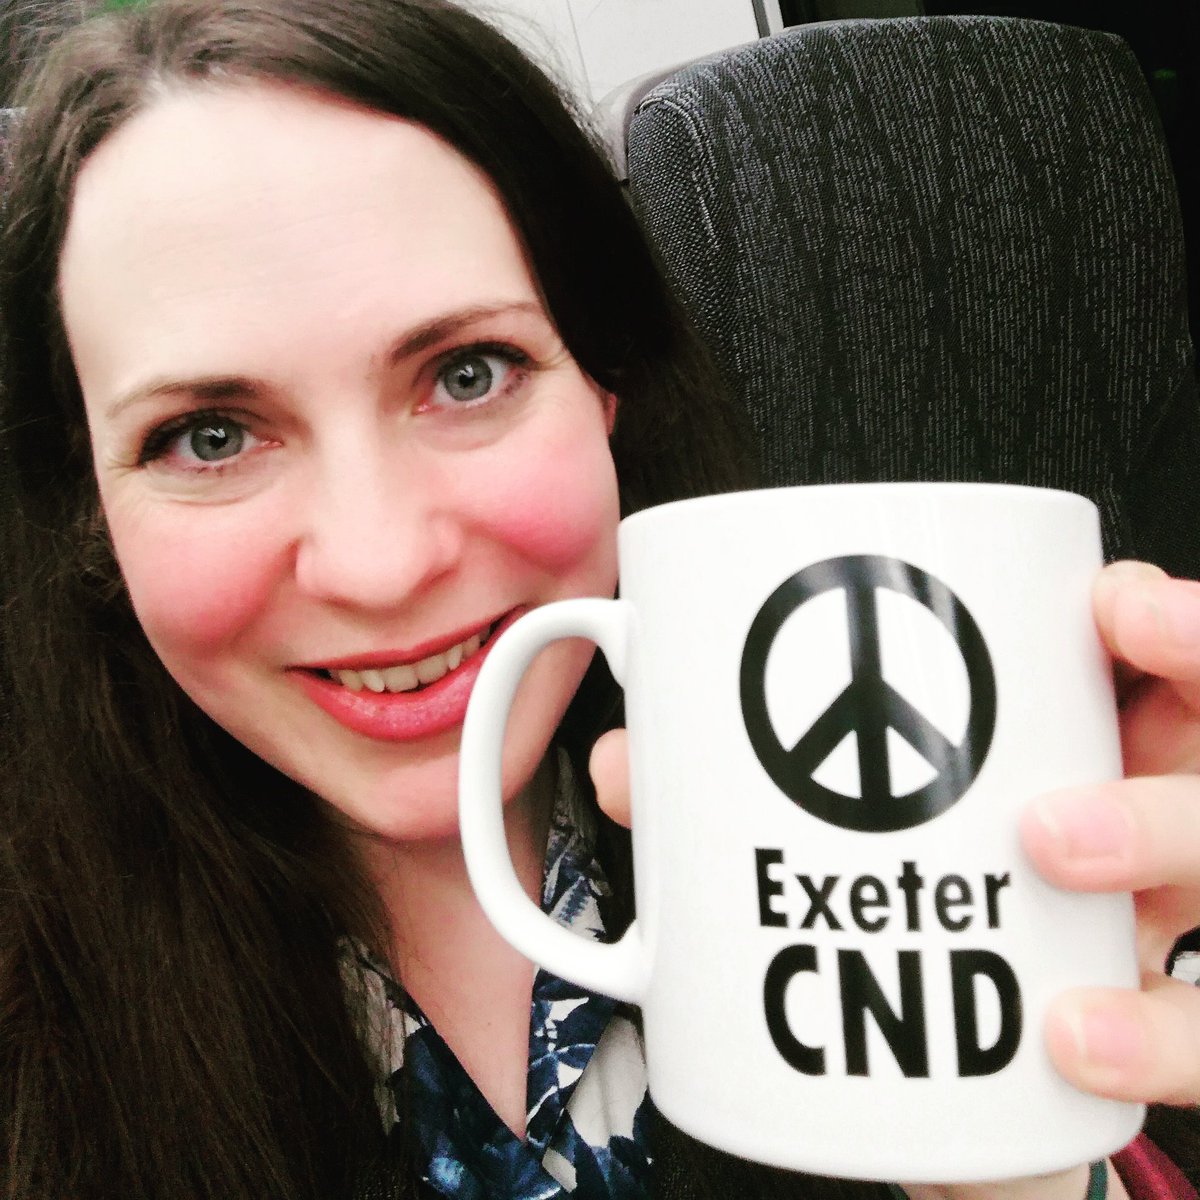 RT Amelia_Womack: In TheGreenParty we loudly and resolutely demanded Trident be scrapped. No compromise. No ifs, buts or maybes.

It was such an honour to talk about our position at ExeterCND as part of CNDuk's Global Dangers Tour.  .news source: TheGreen…